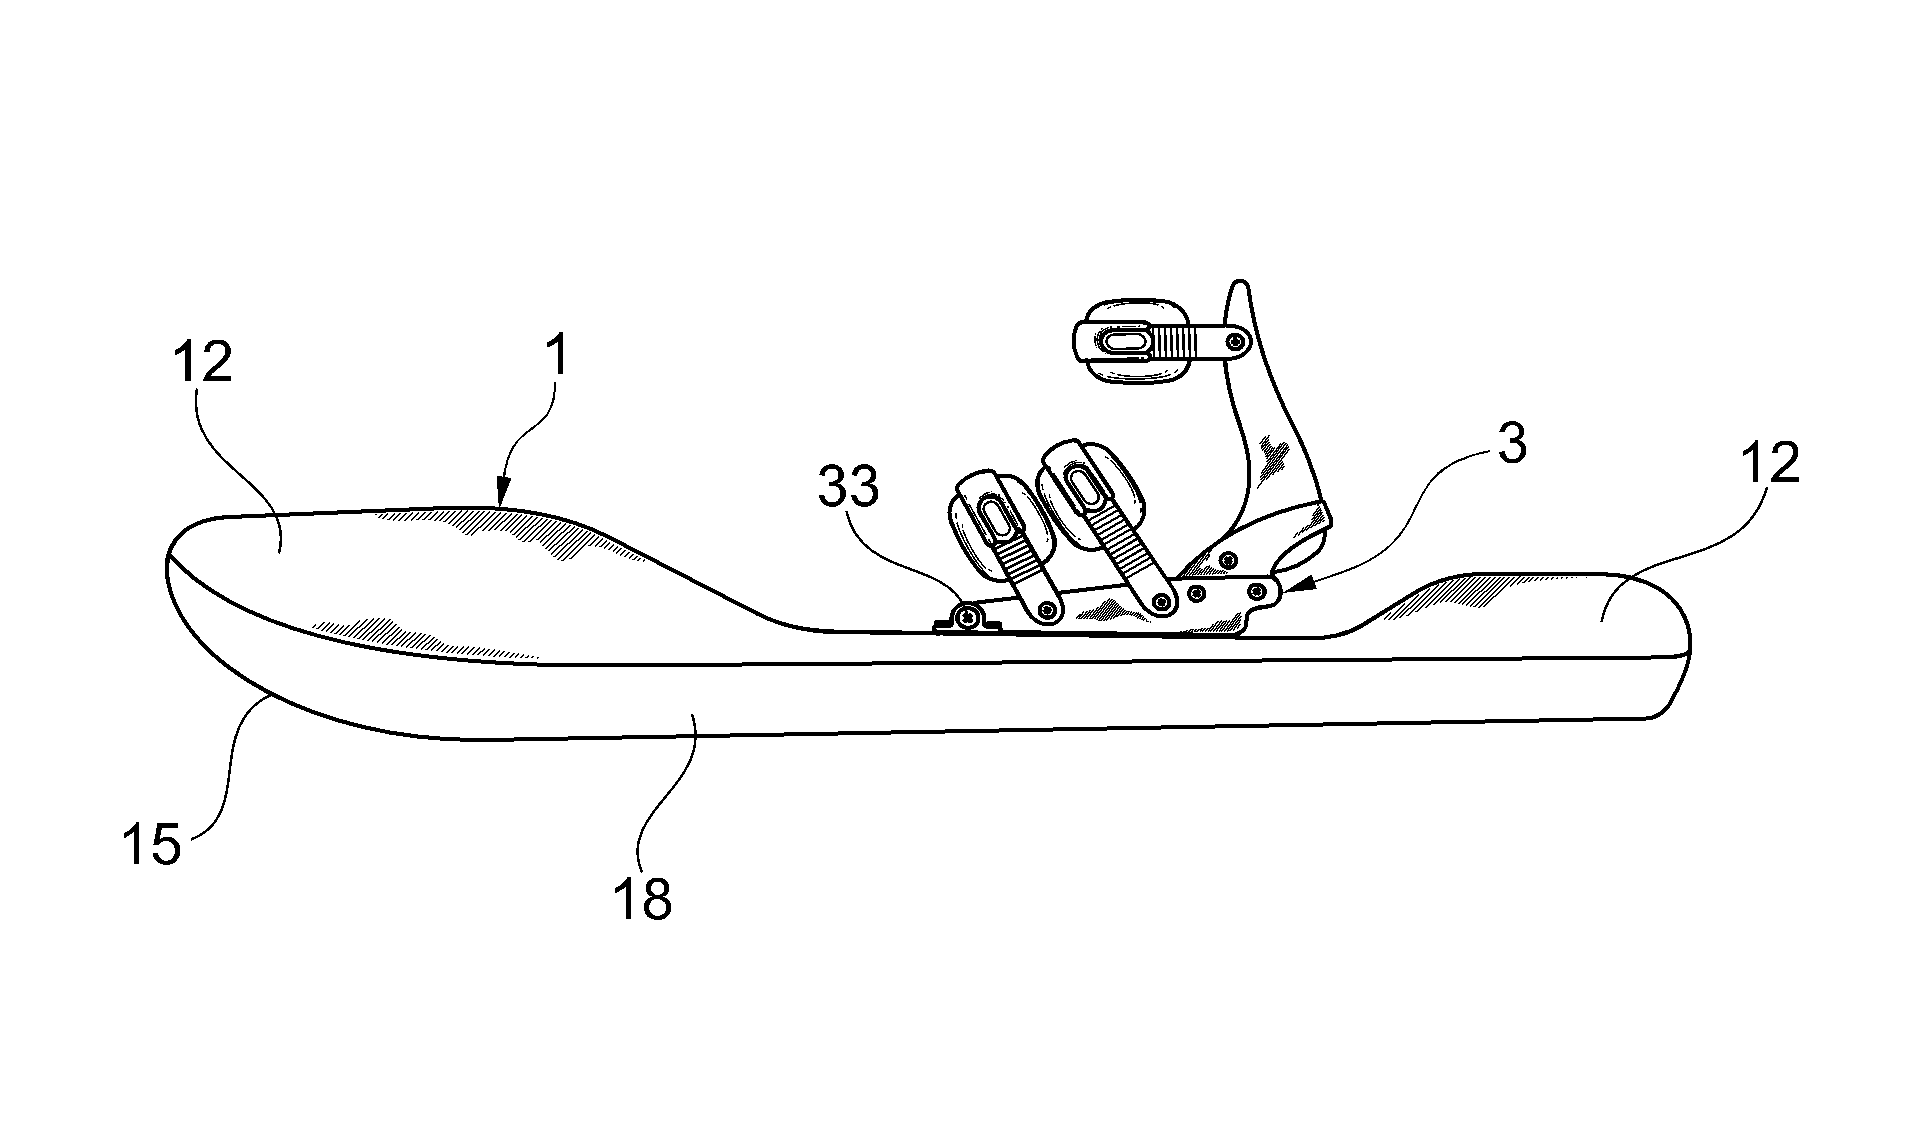 Snowshoe-ski that allows user to glide downhill as well as climb